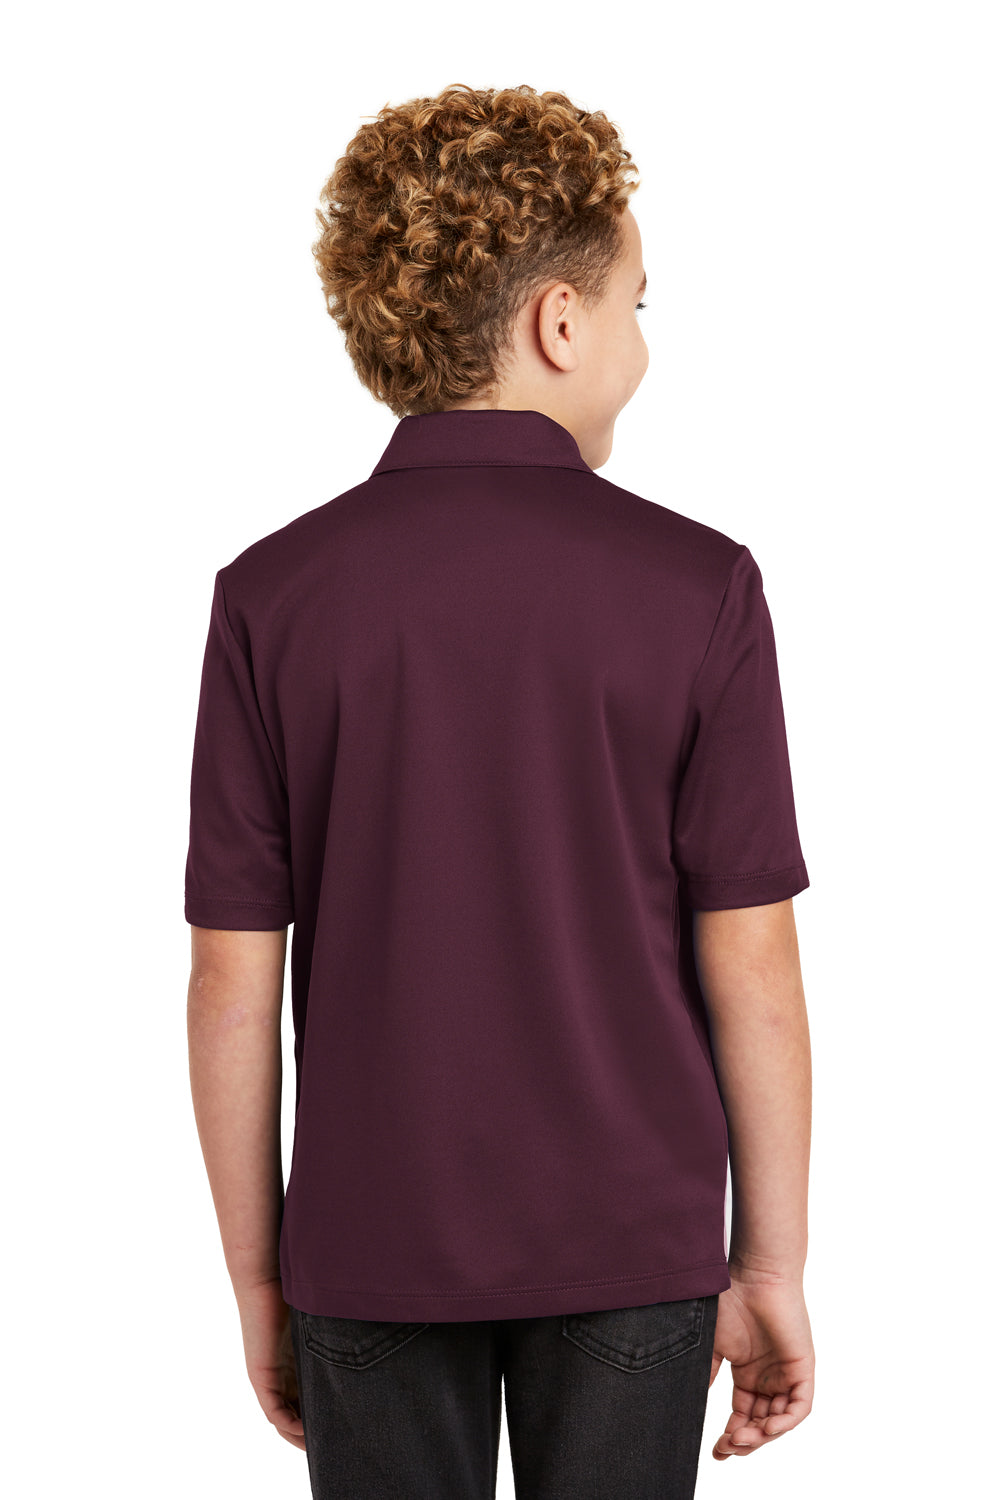 Port Authority Y540 Youth Silk Touch Performance Moisture Wicking Short Sleeve Polo Shirt Maroon Back